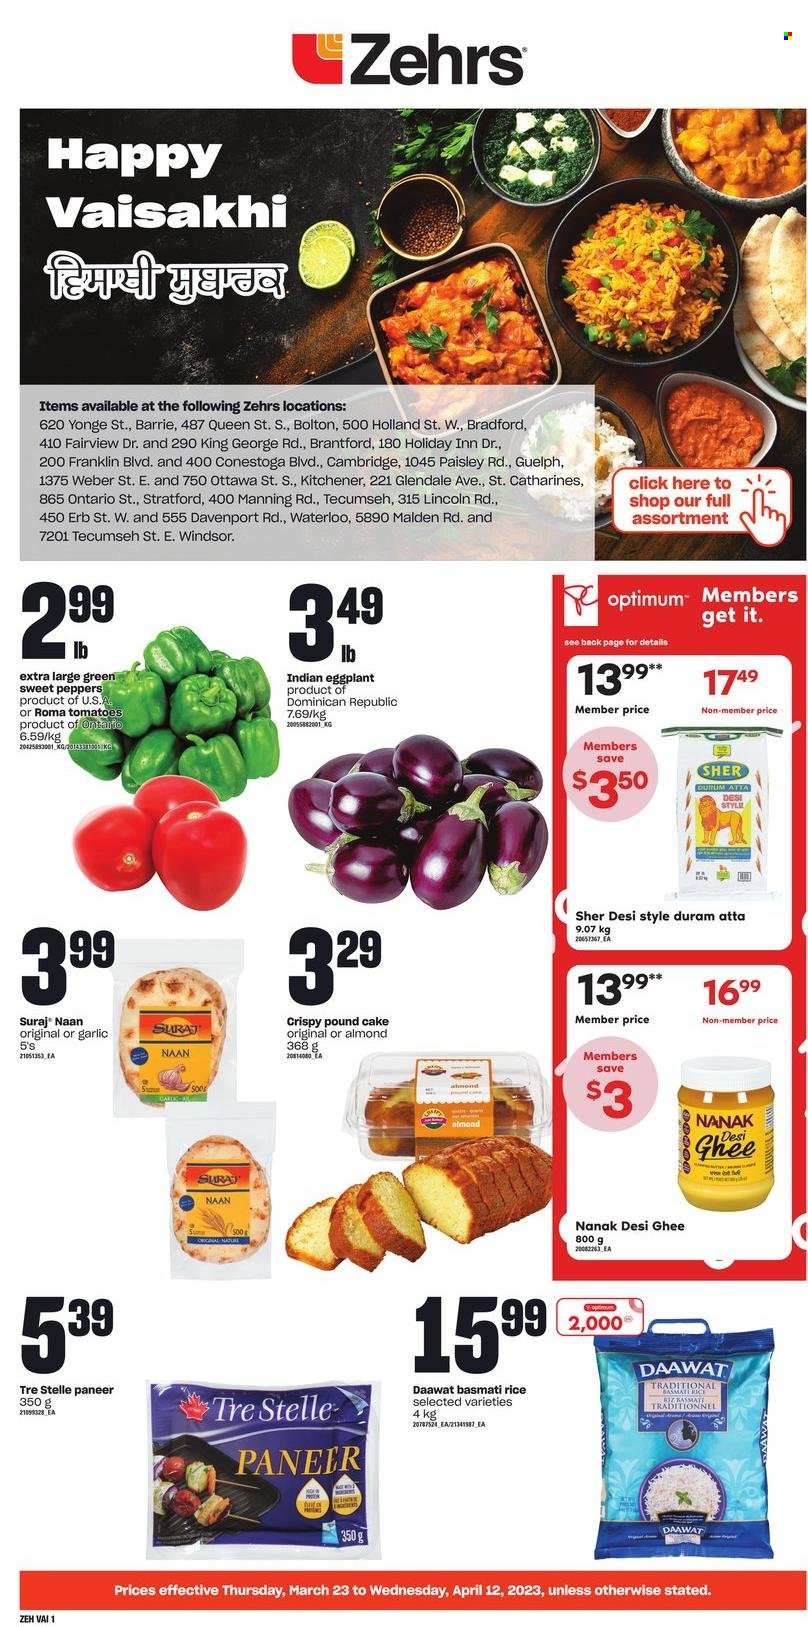 thumbnail - Zehrs Flyer - March 23, 2023 - April 12, 2023 - Sales products - cake, pound cake, garlic, sweet peppers, tomatoes, peppers, eggplant, paneer, ghee, flour, basmati rice, Optimum, Weber. Page 1.